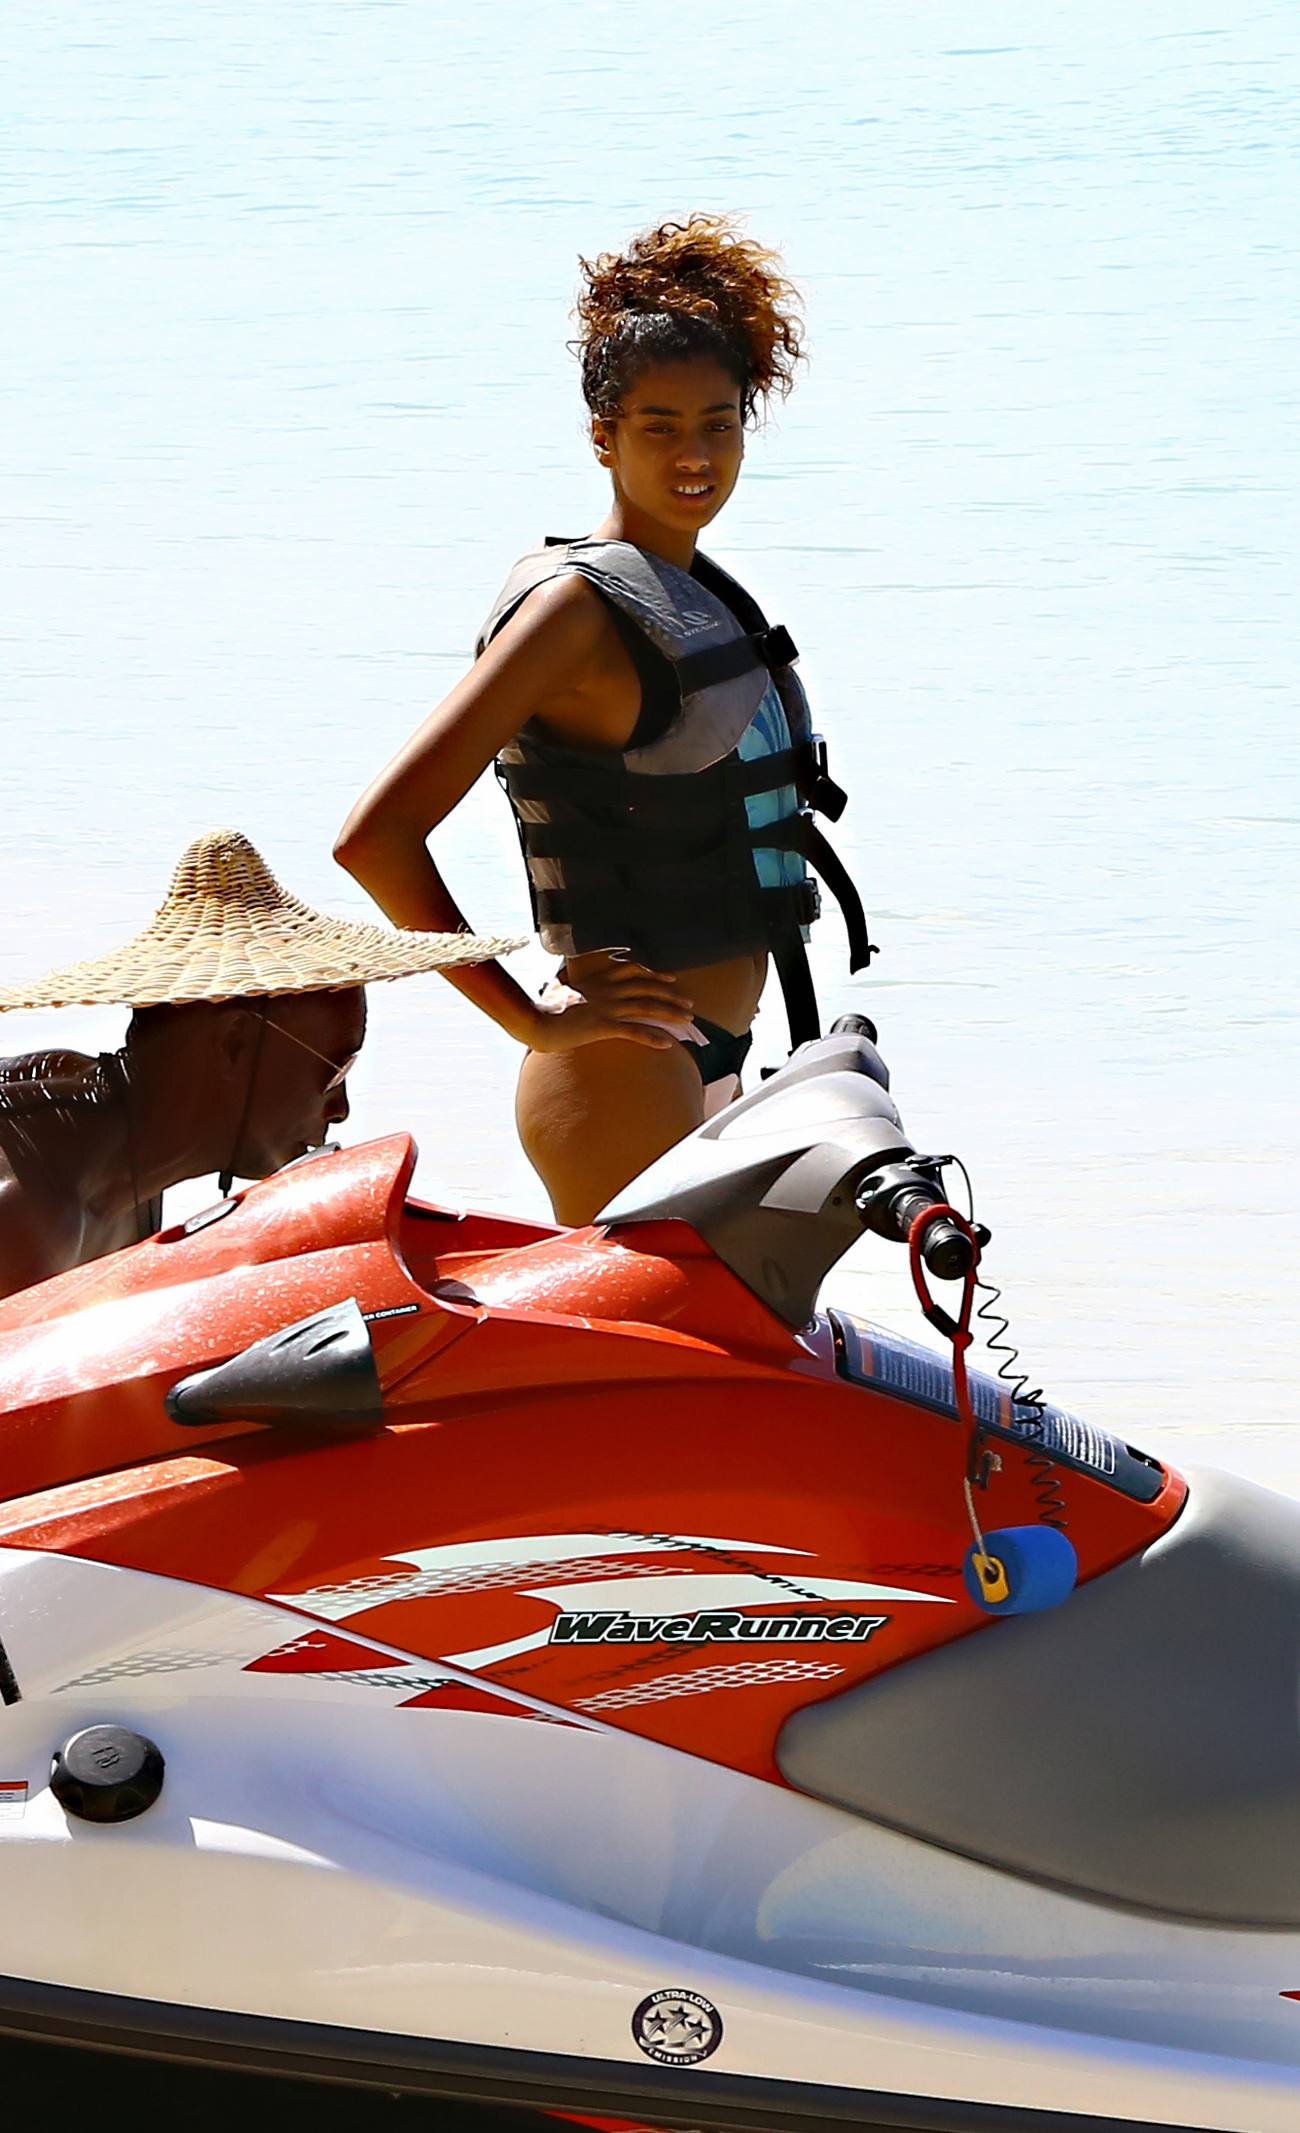 Imaan Hammam Spotted Riding Jet Skis in Barbados